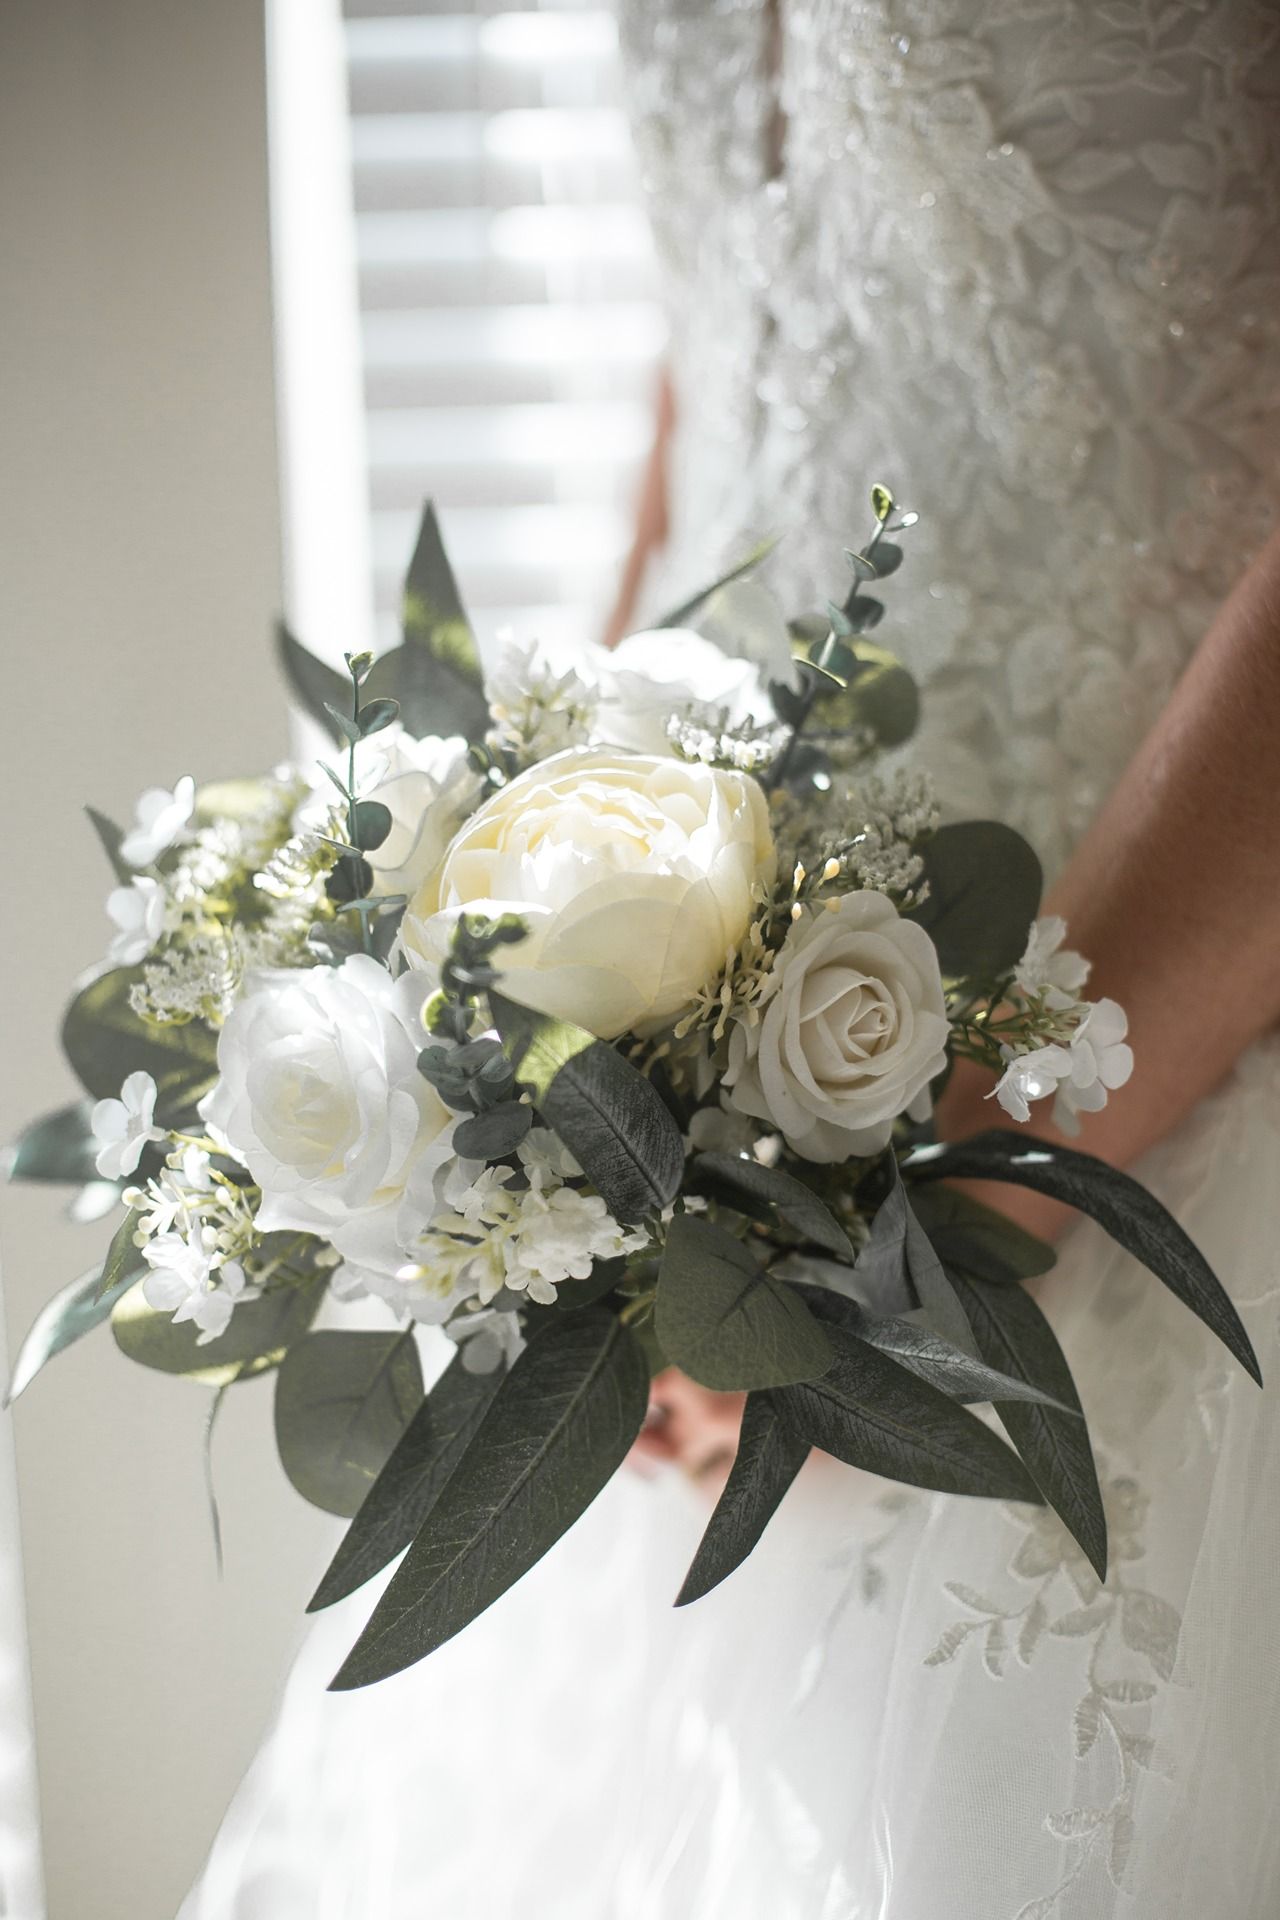 A bride holding a beautiful bouquet of flowers for a wedding at Catamount Resort